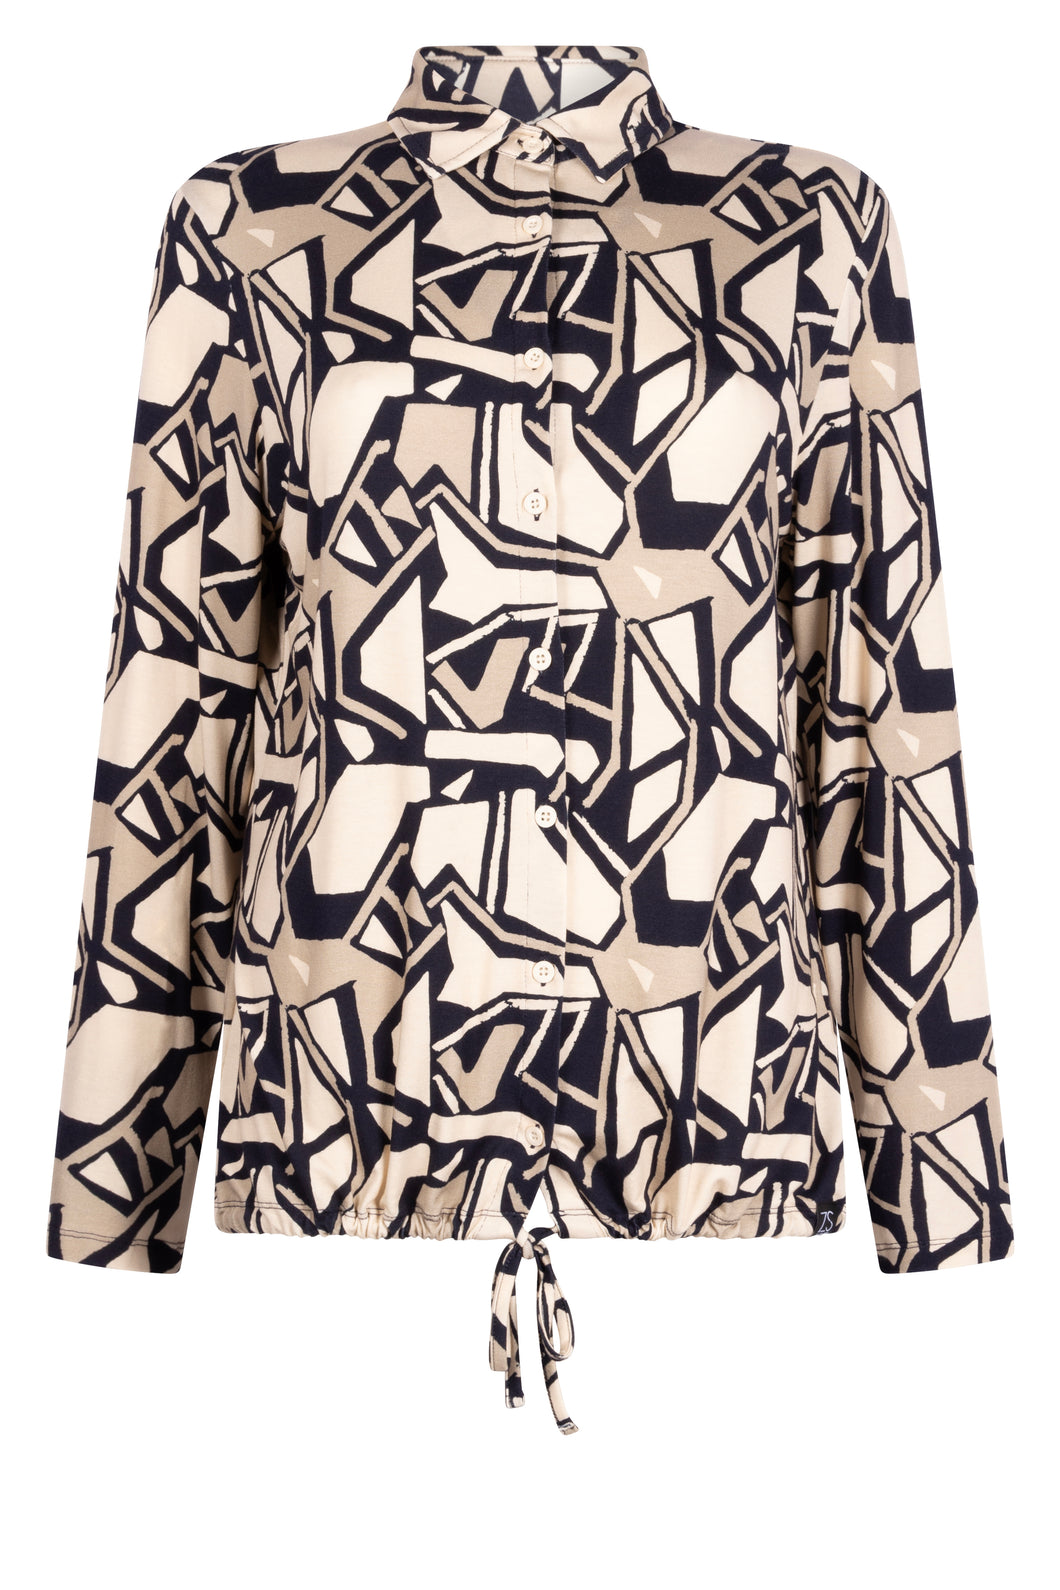 ZOSO EDITH ALLOVER PRINTED BLOUSE navy/ivory/sand